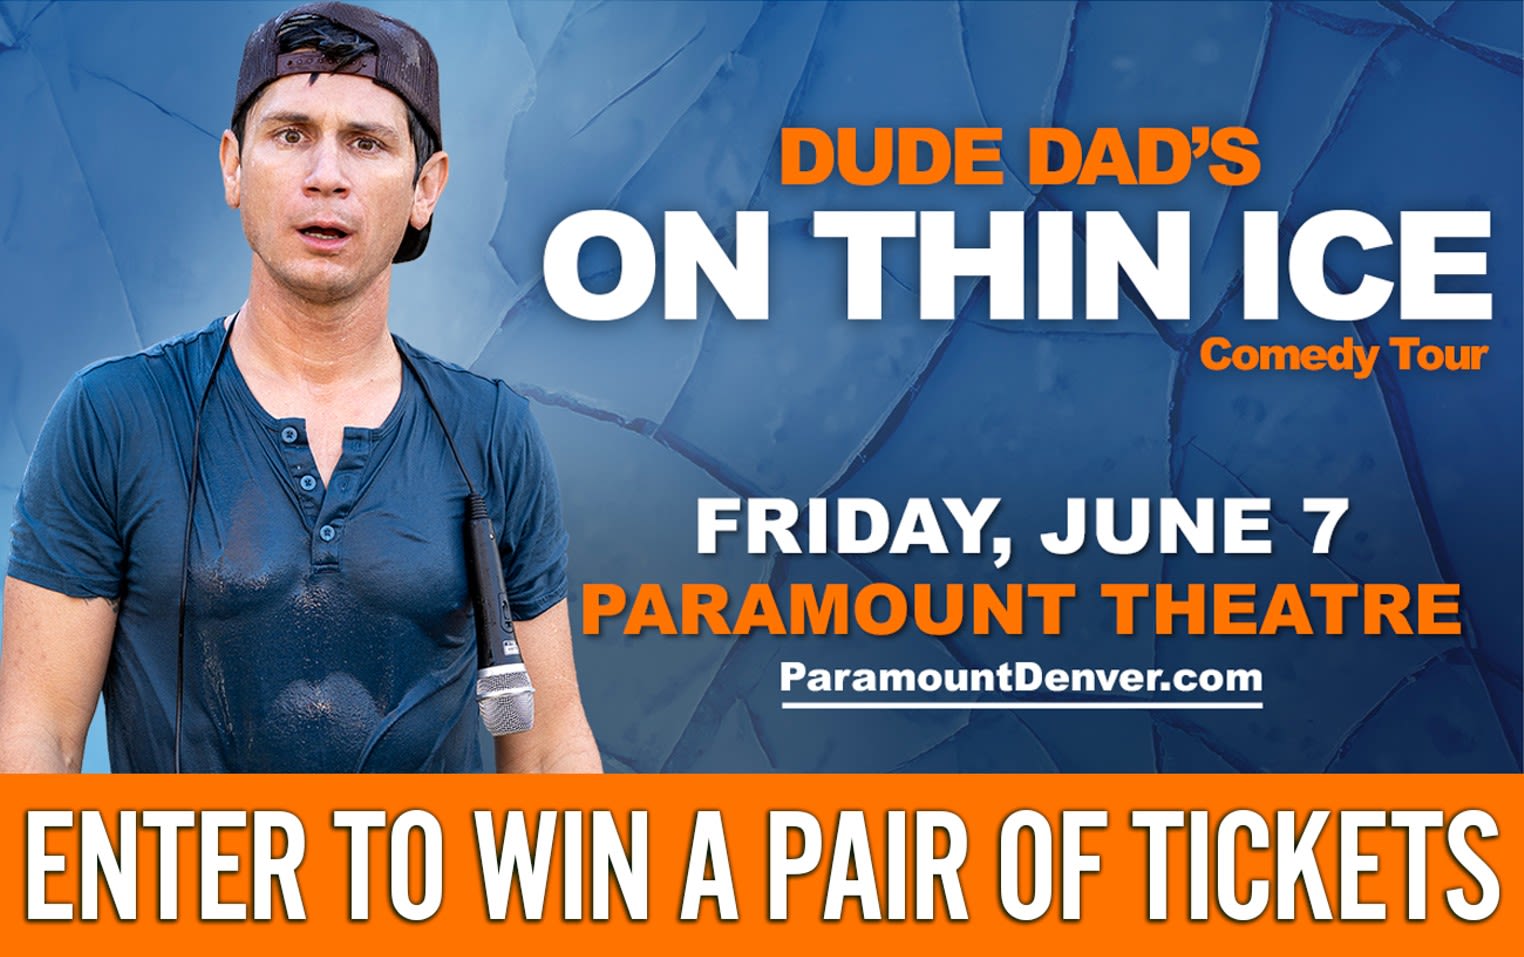 Enter to win a pair of tickets to Dude Dad's "ON THIN ICE" comedy tour on Friday, June 7 at the Paramount Theatre!